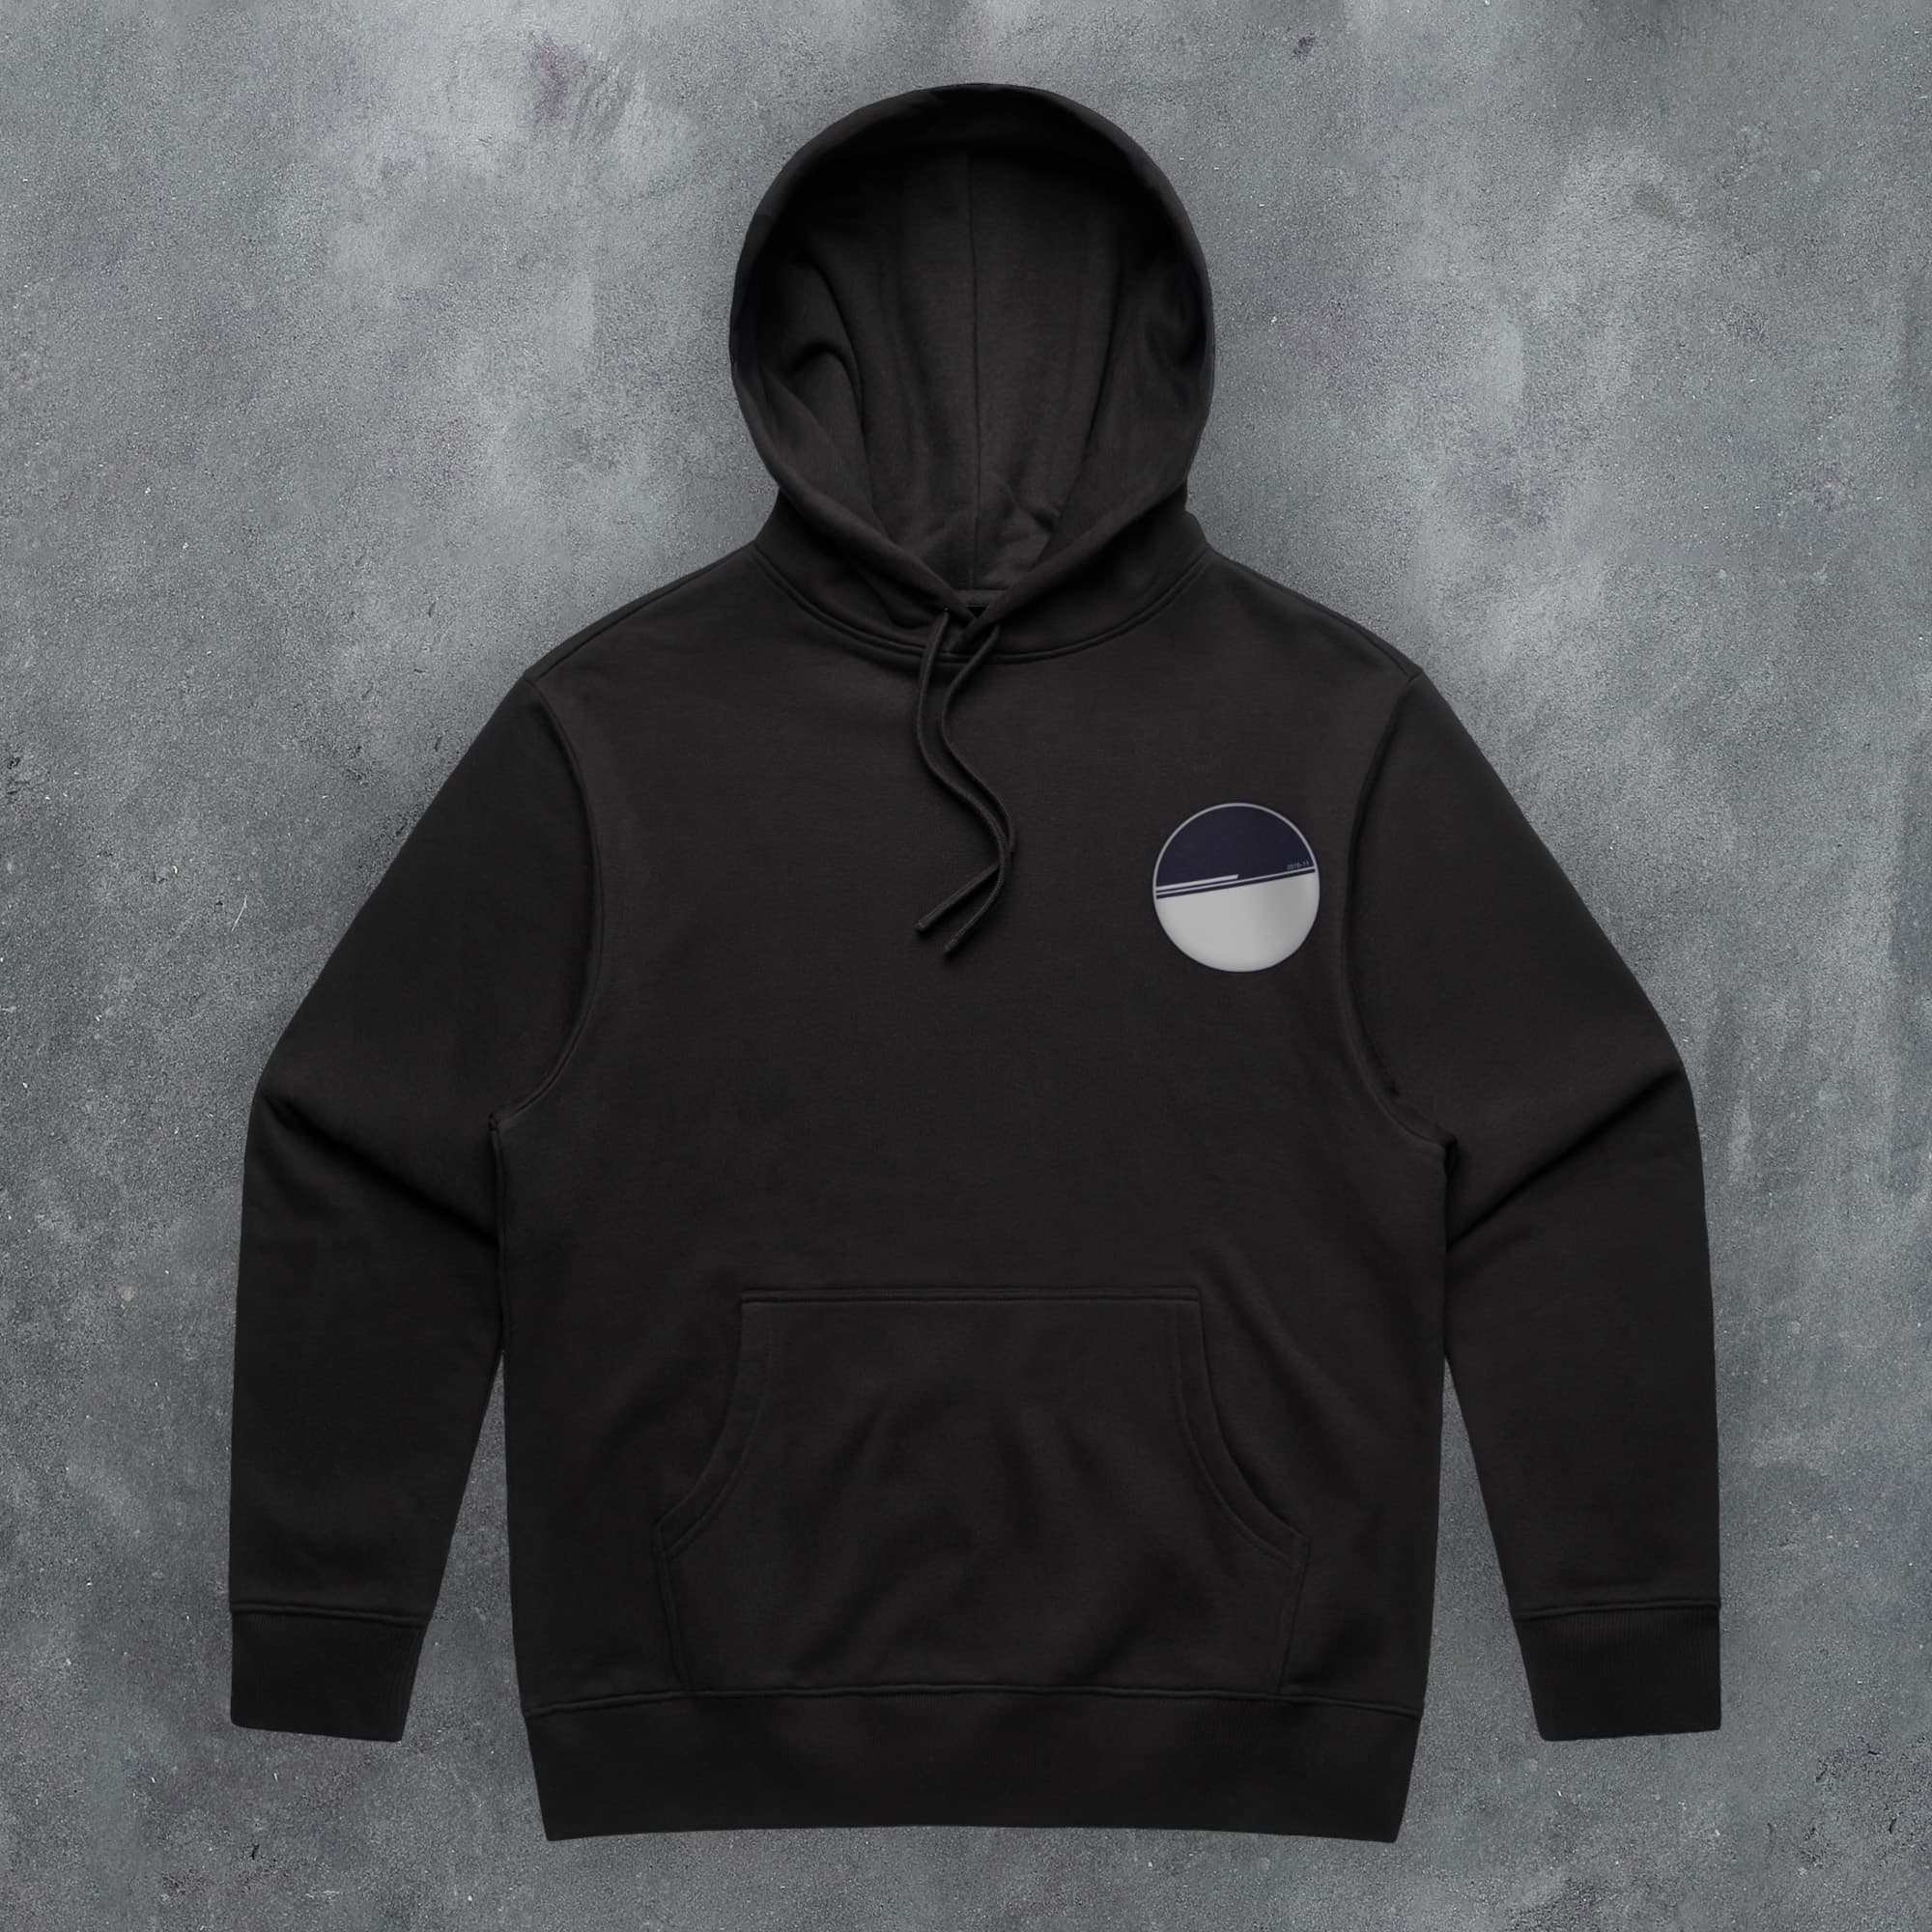 a black hoodie with a white circle on it